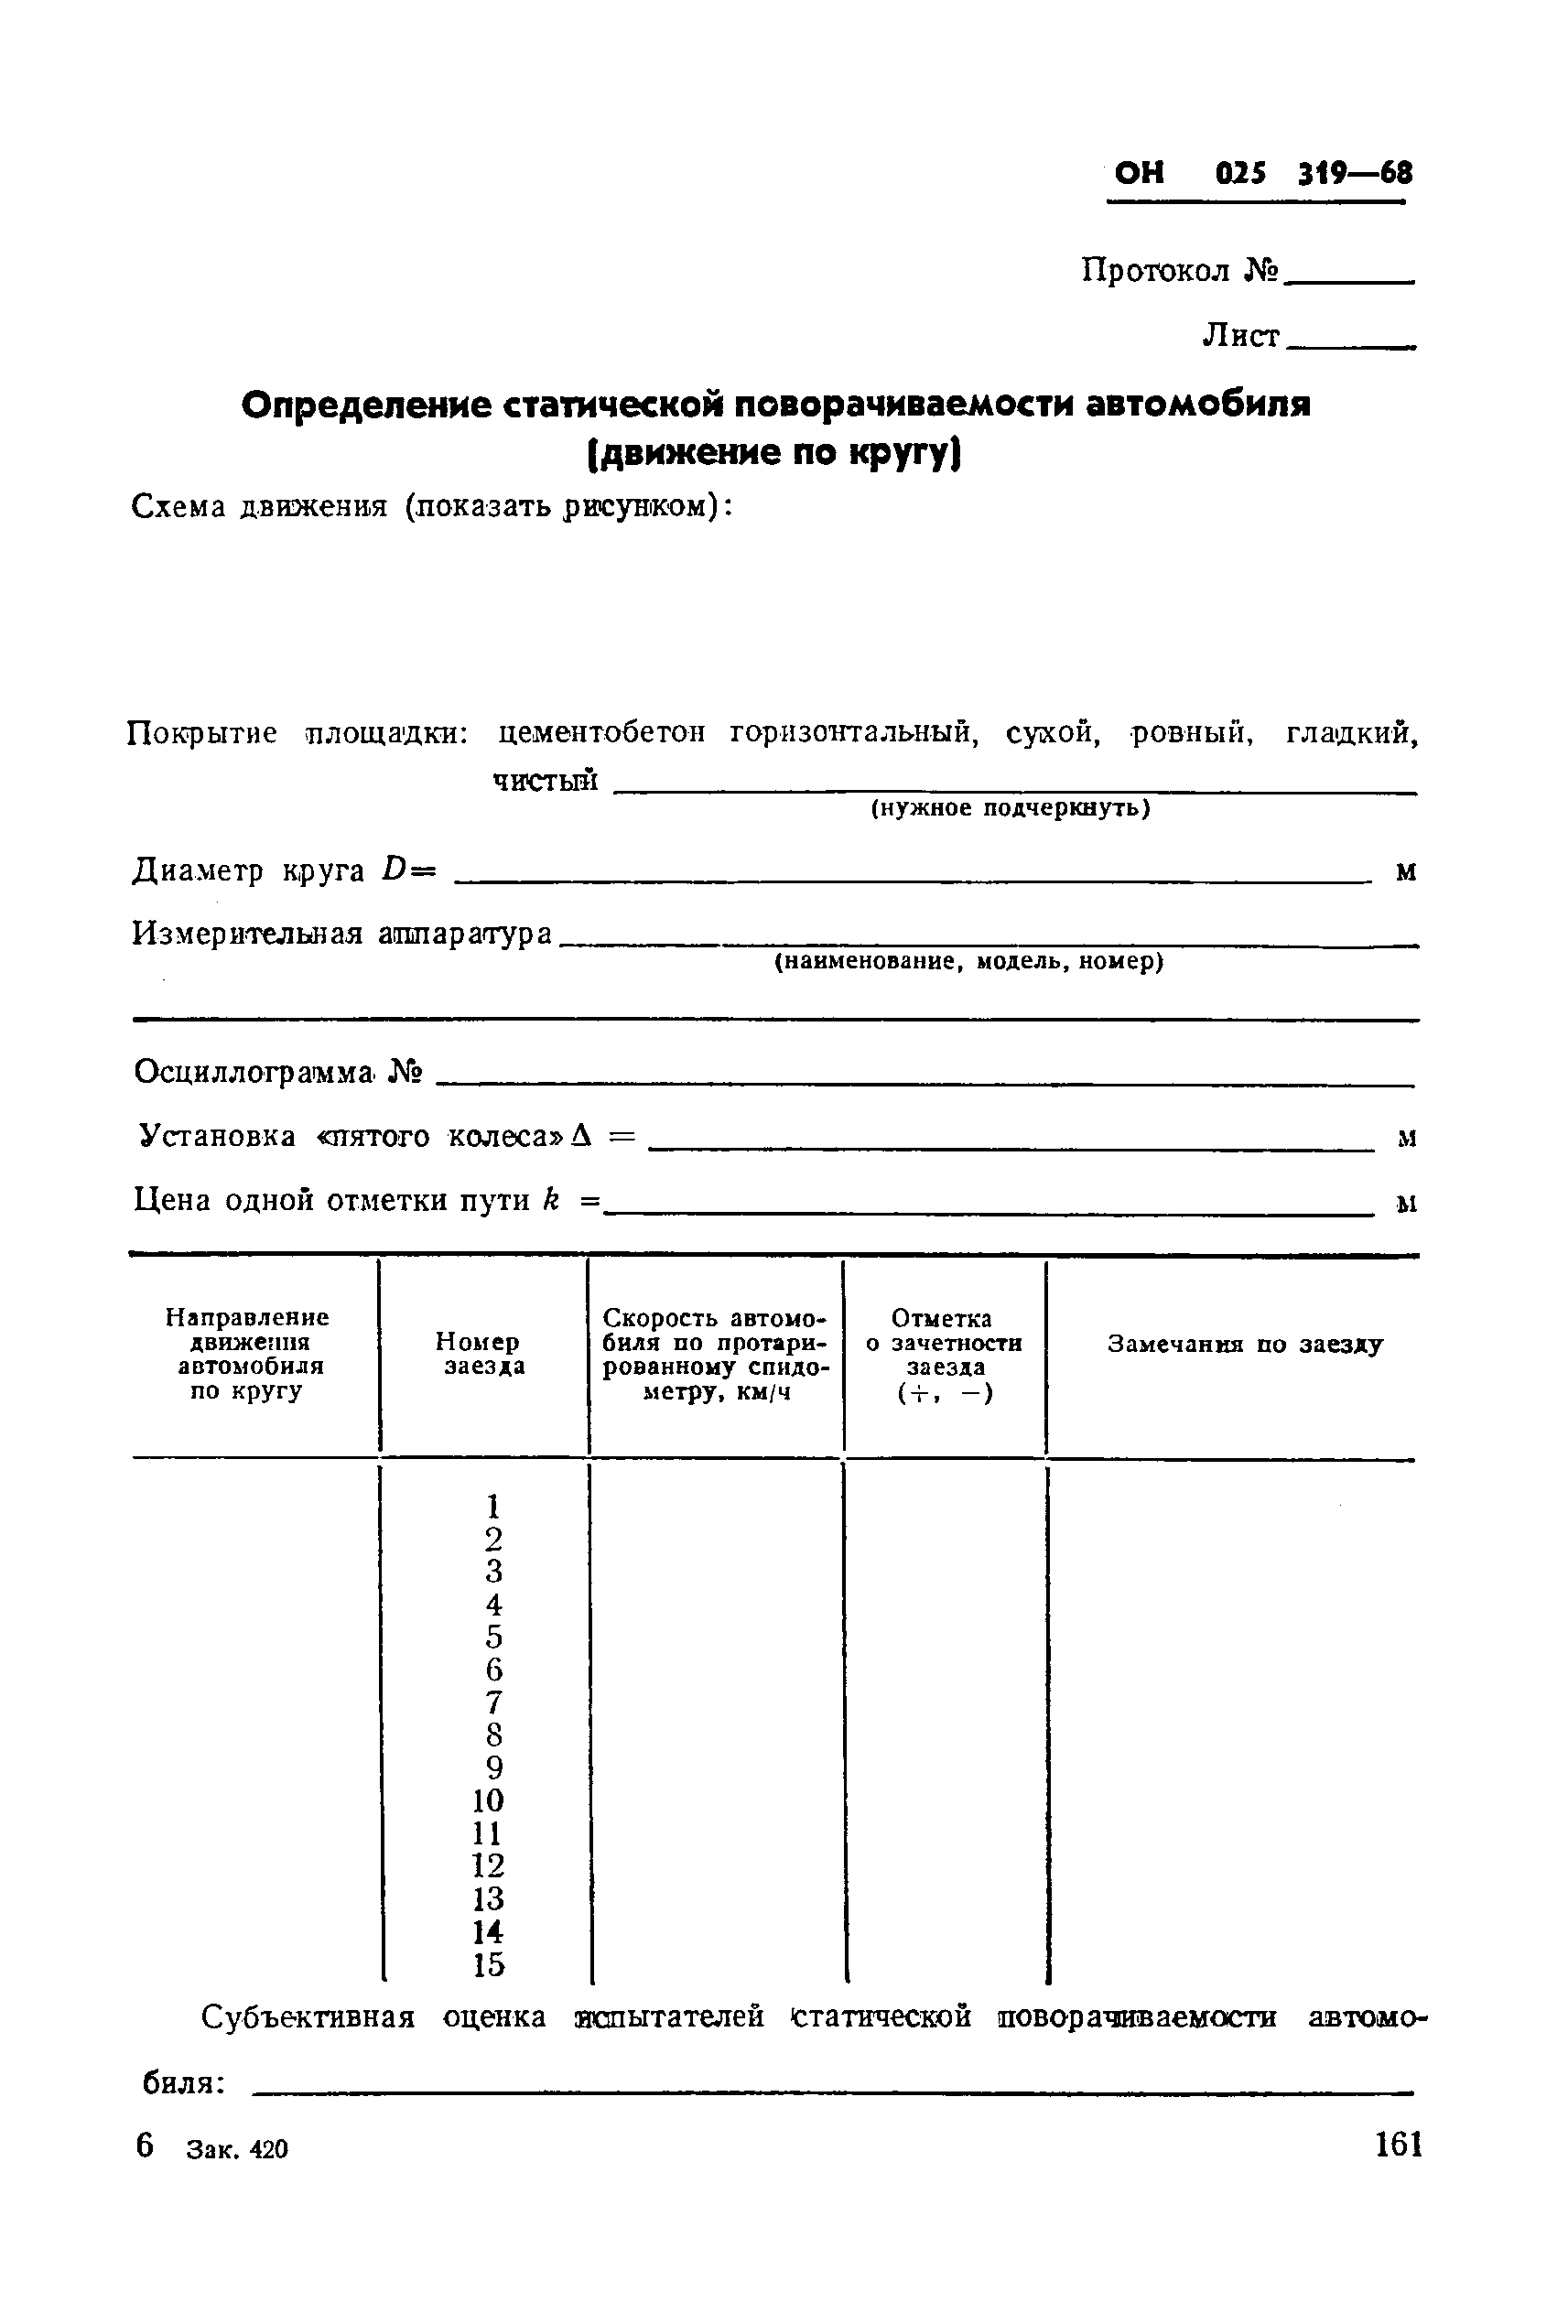 ОН 025 319-68